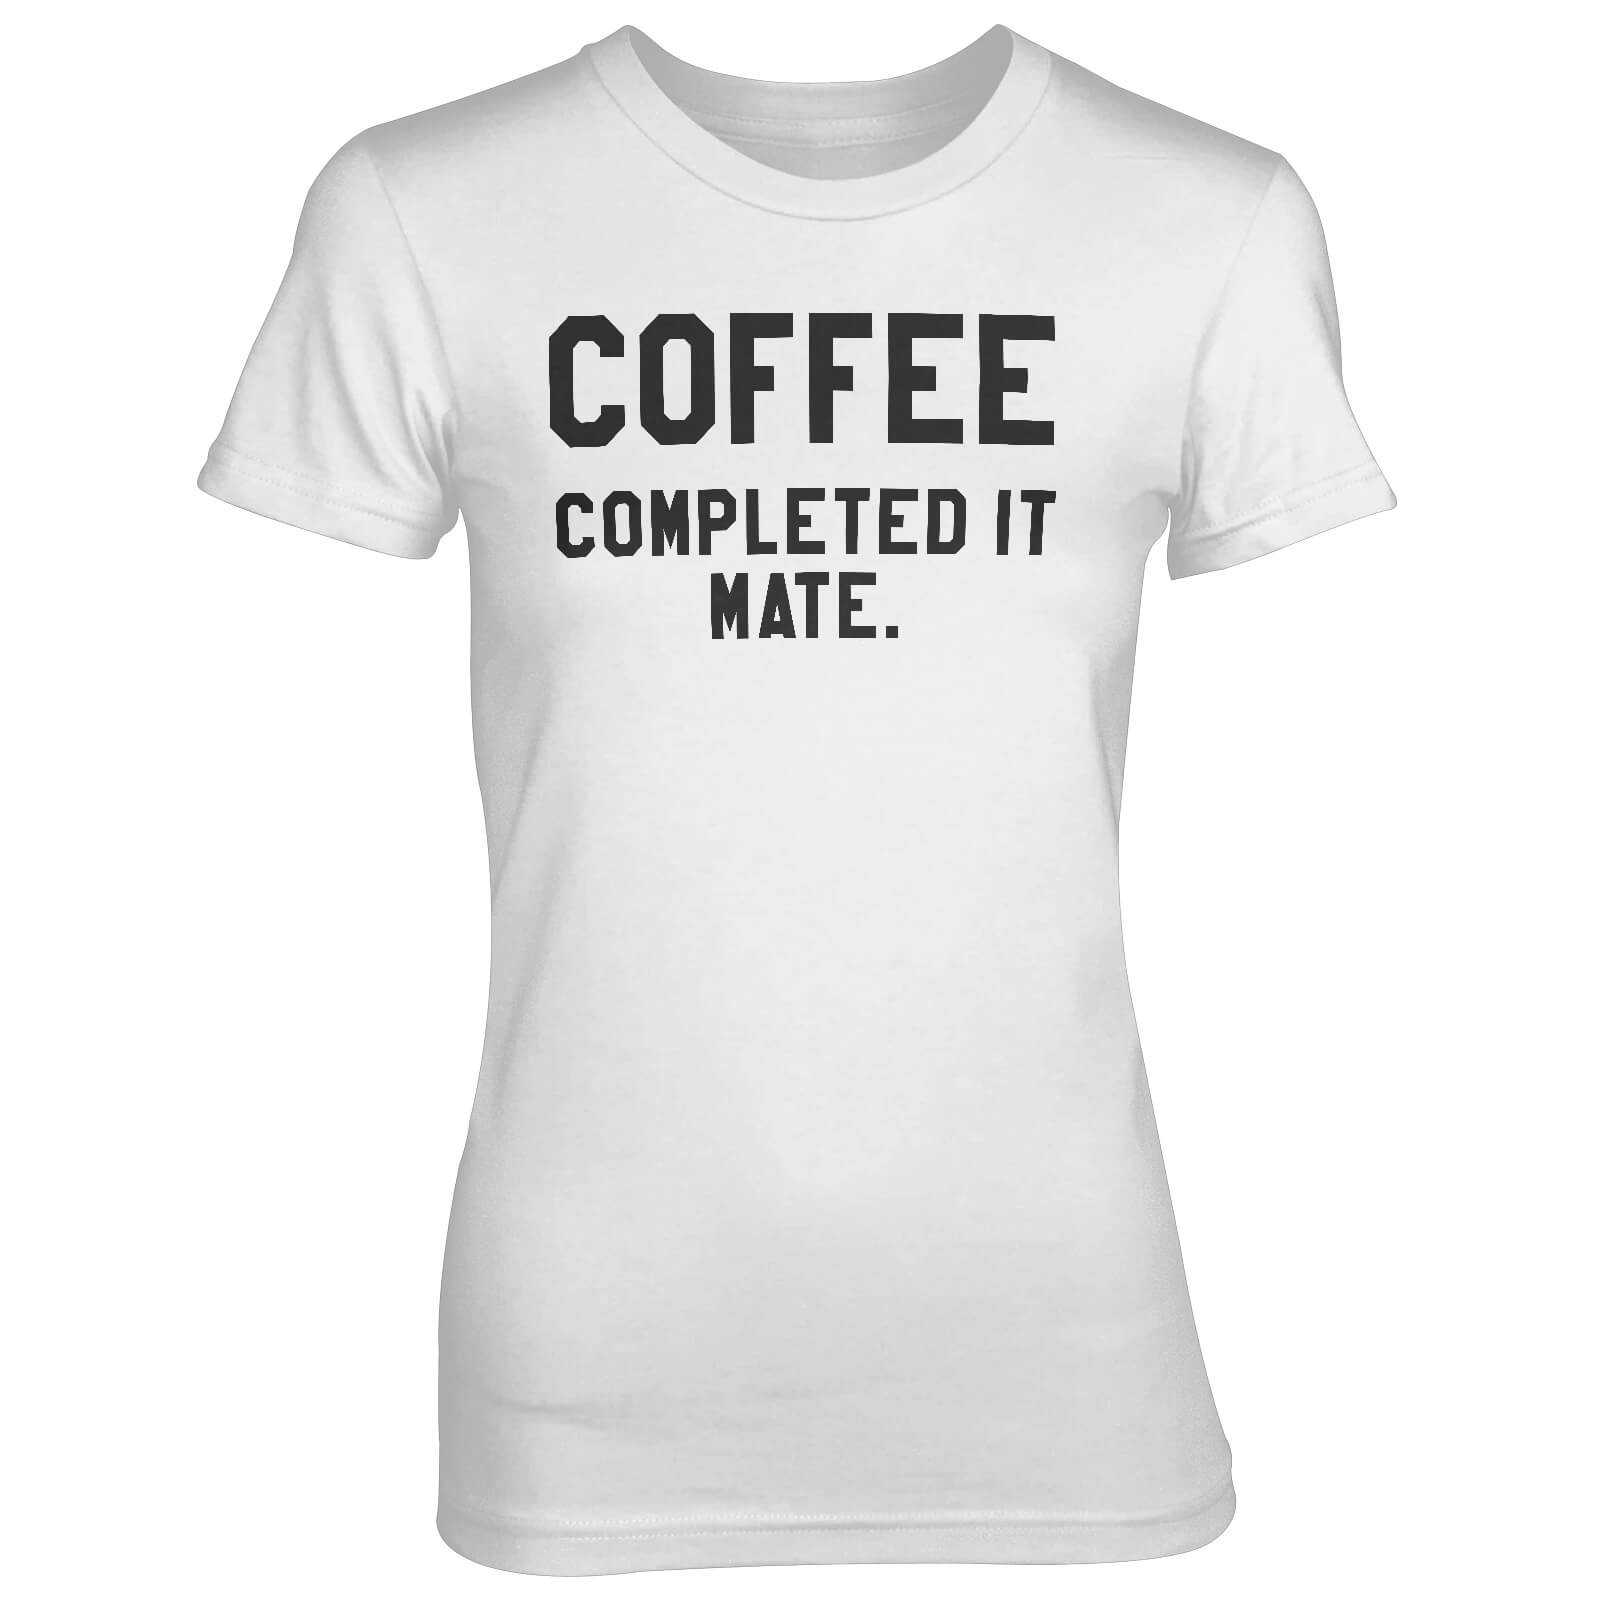 Coffee - Completed It Mate Women's White T-Shirt - S - White